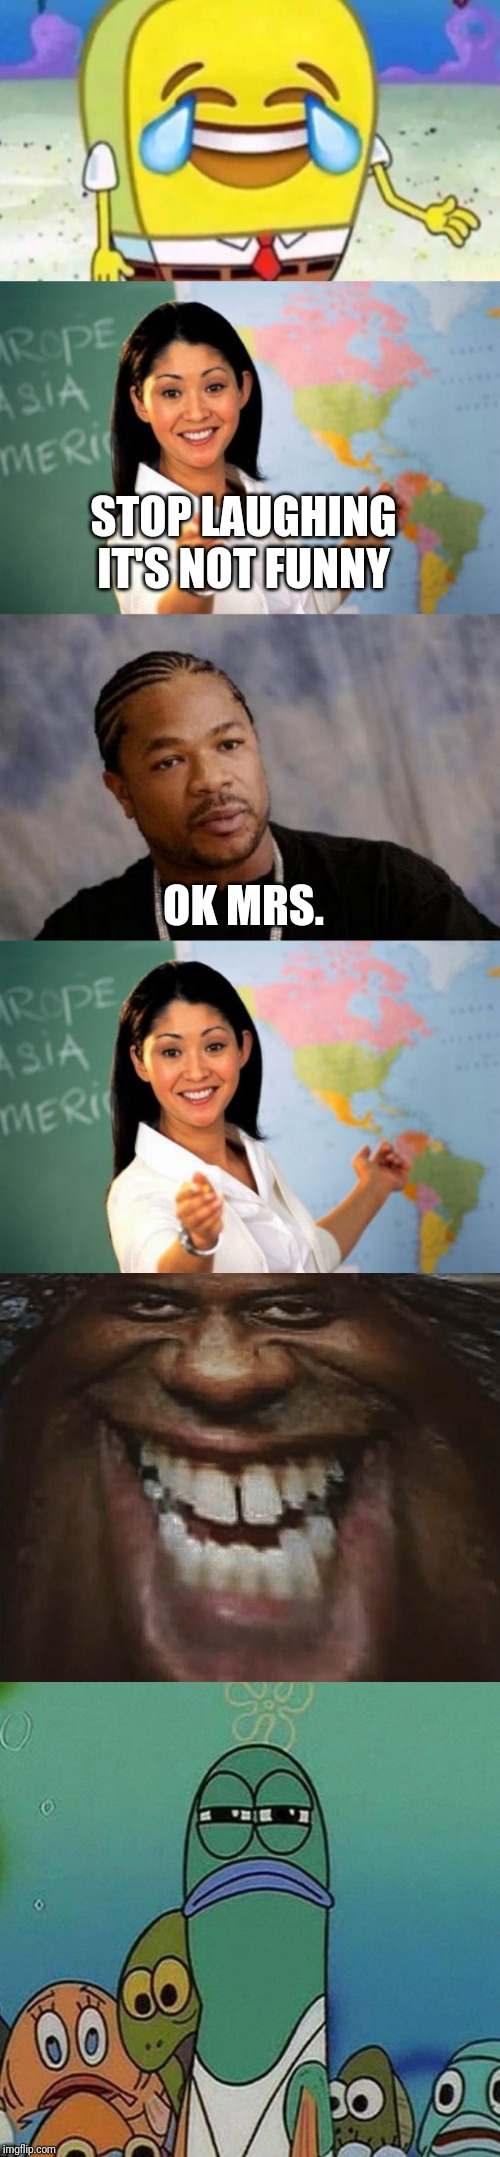 STOP LAUGHING IT'S NOT FUNNY; OK MRS. | image tagged in memes,unhelpful high school teacher,serious xzibit,spongebob | made w/ Imgflip meme maker